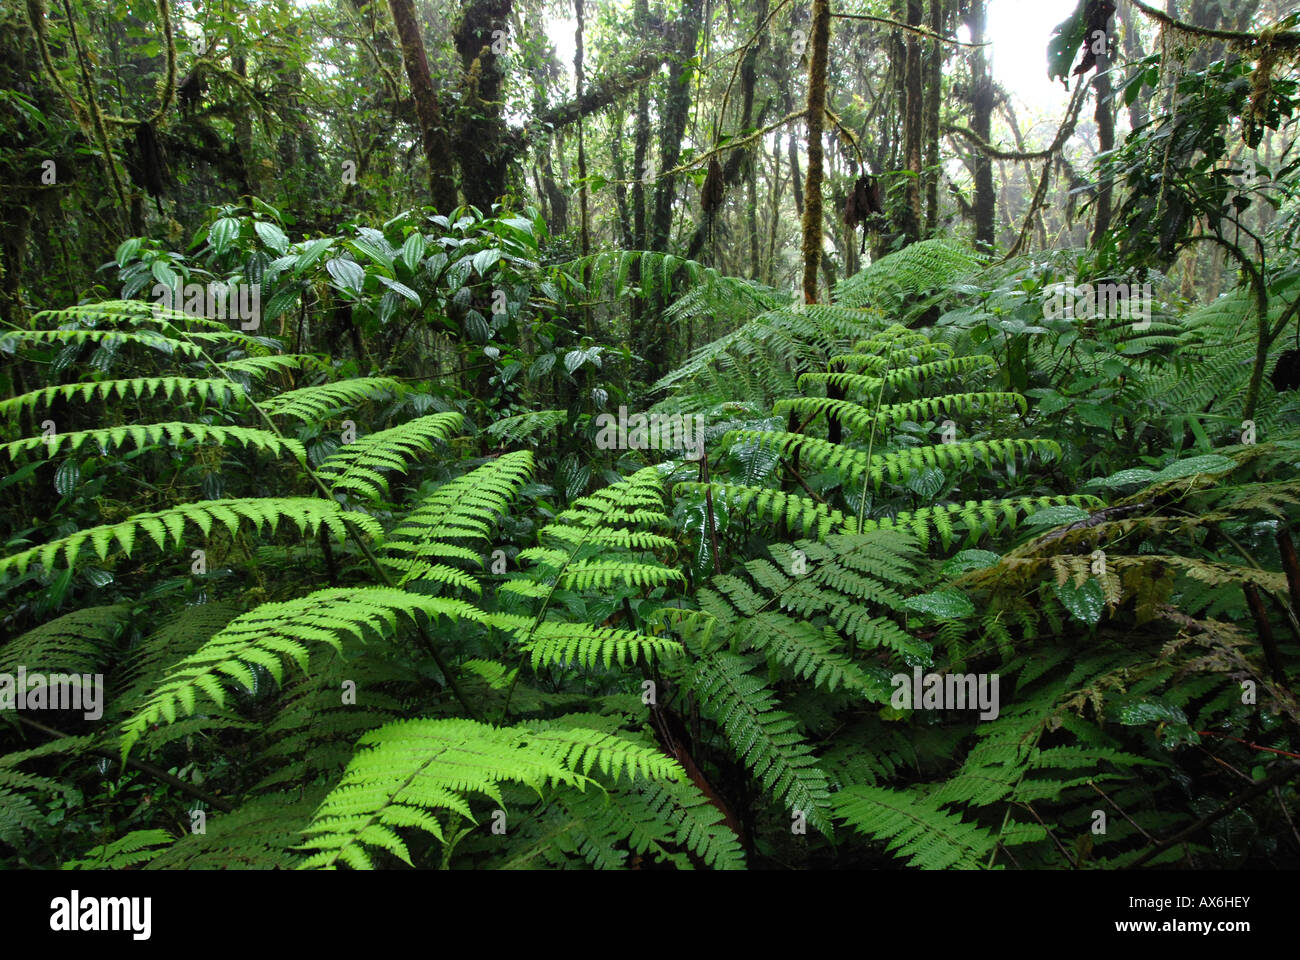 Fern in tropical cloudforest, Monte Verde National Park, Costa Rica Banque D'Images